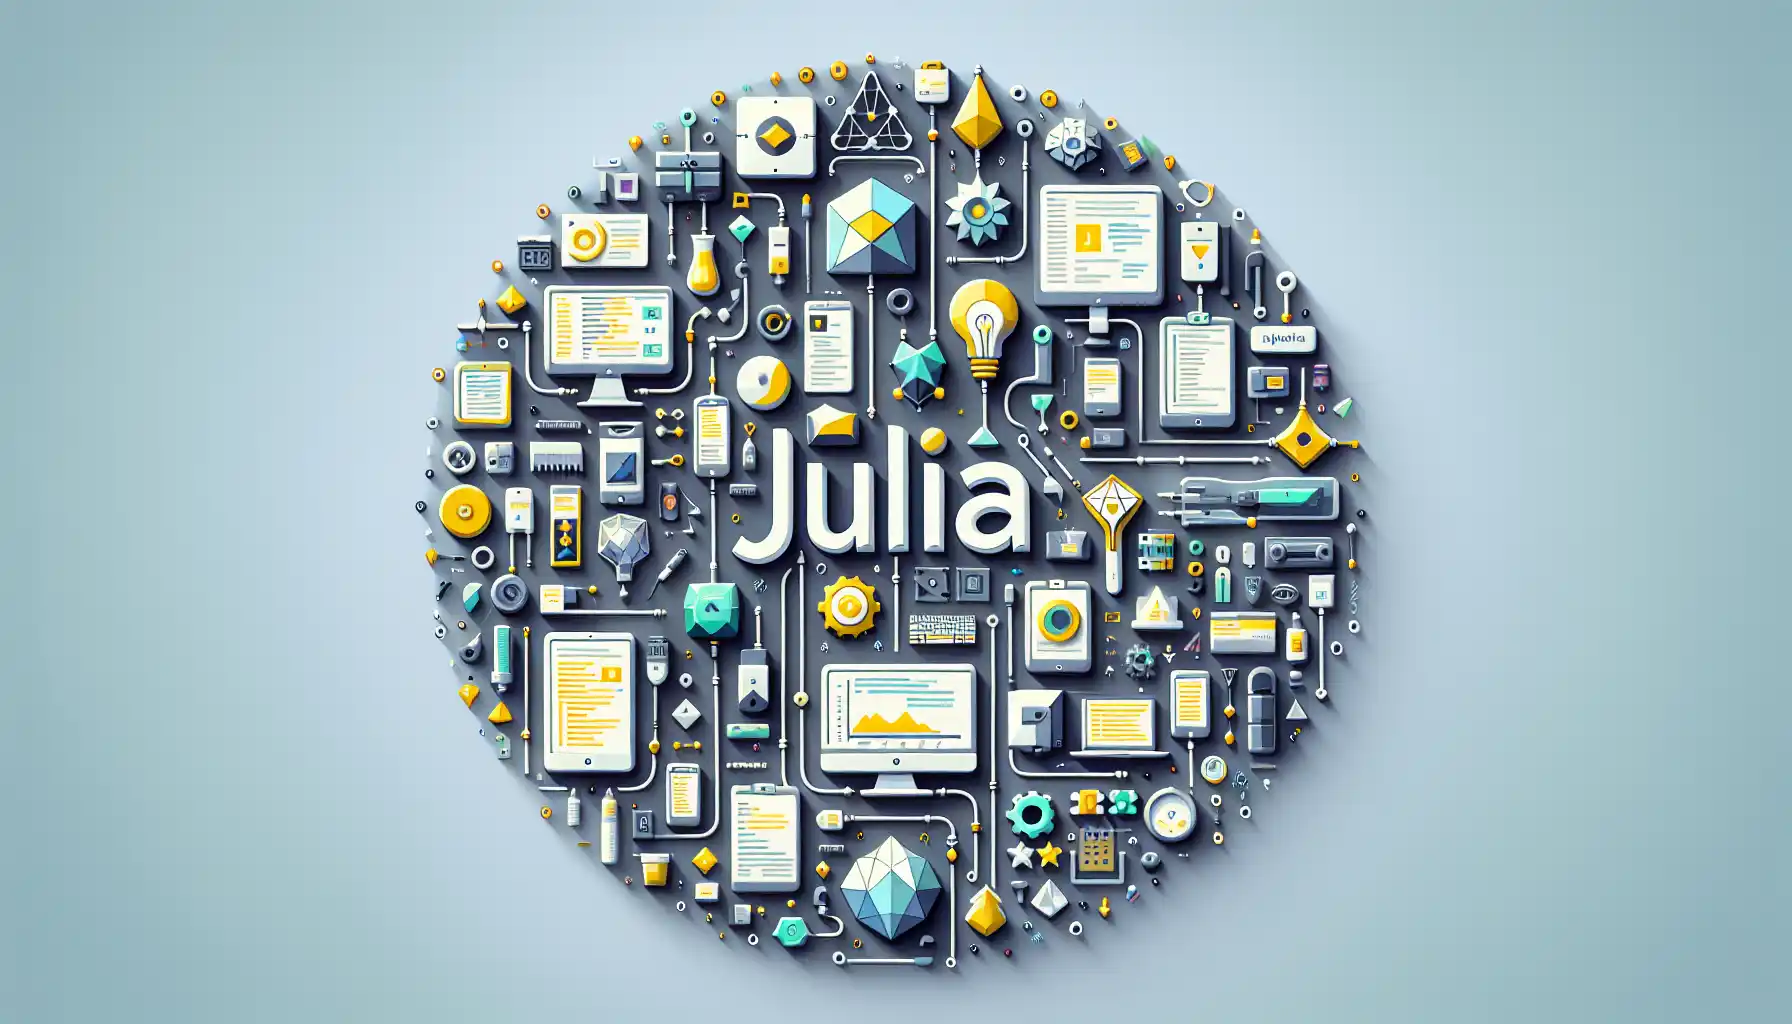 Tools for Data Science in Julia